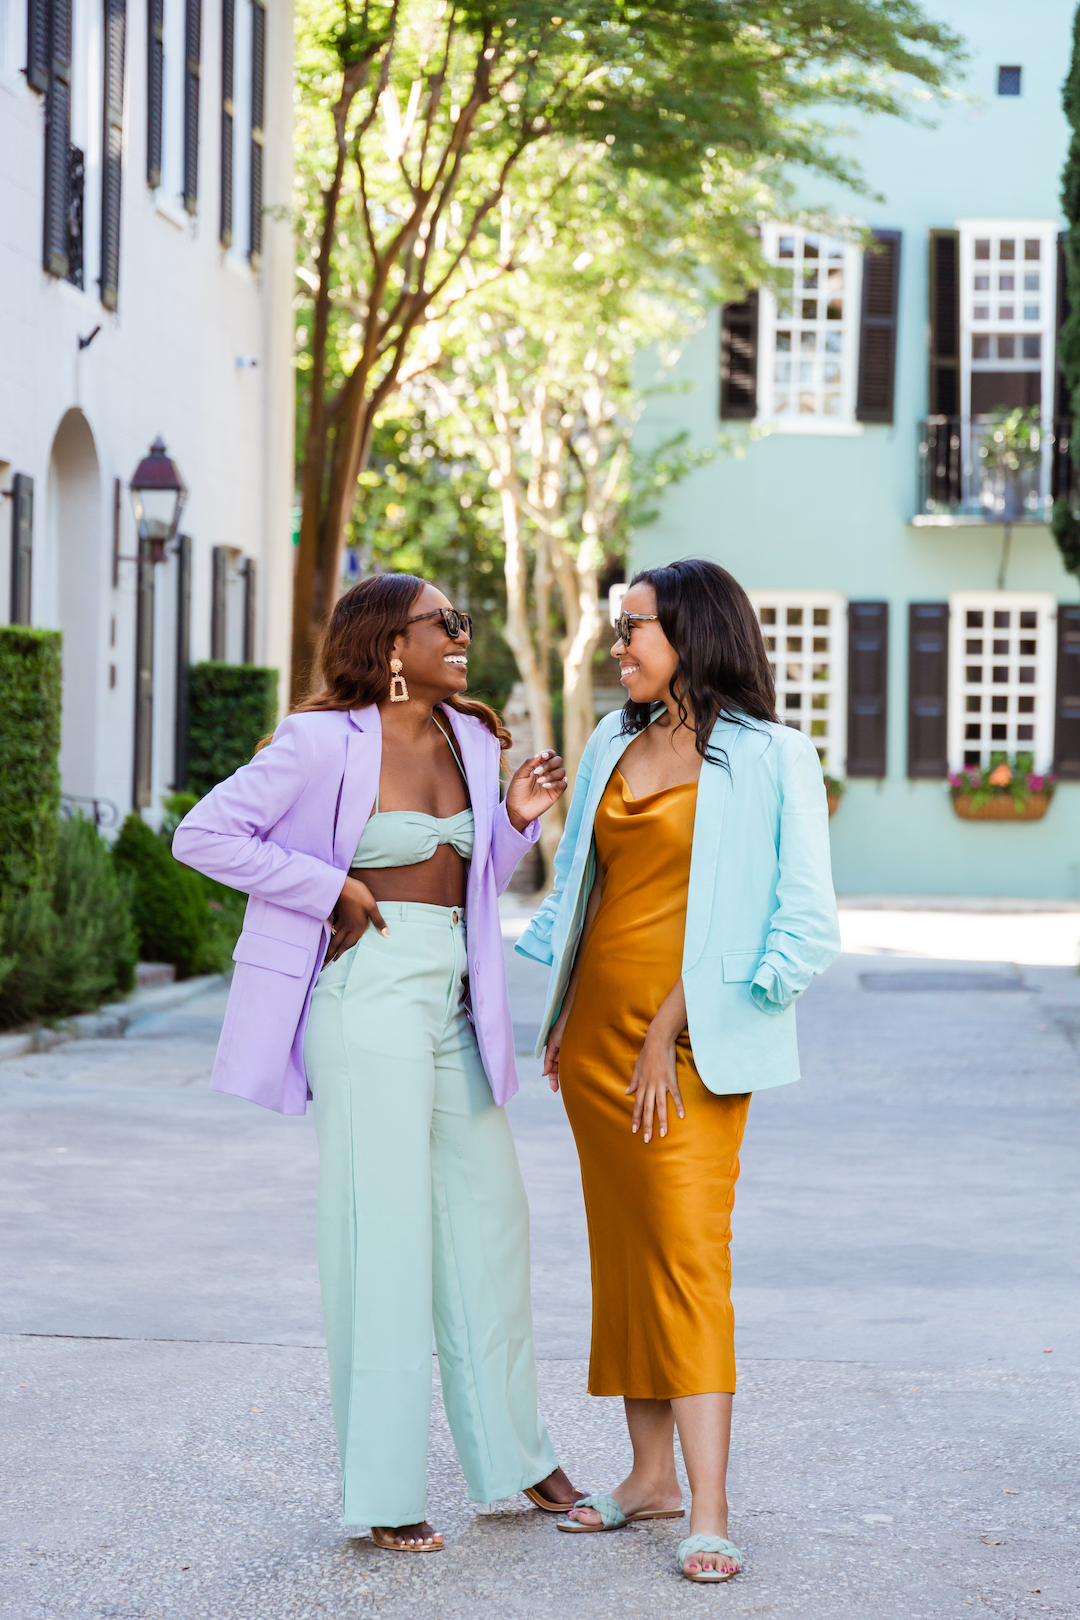 23 Black Women Influencers to follow on social media this year 